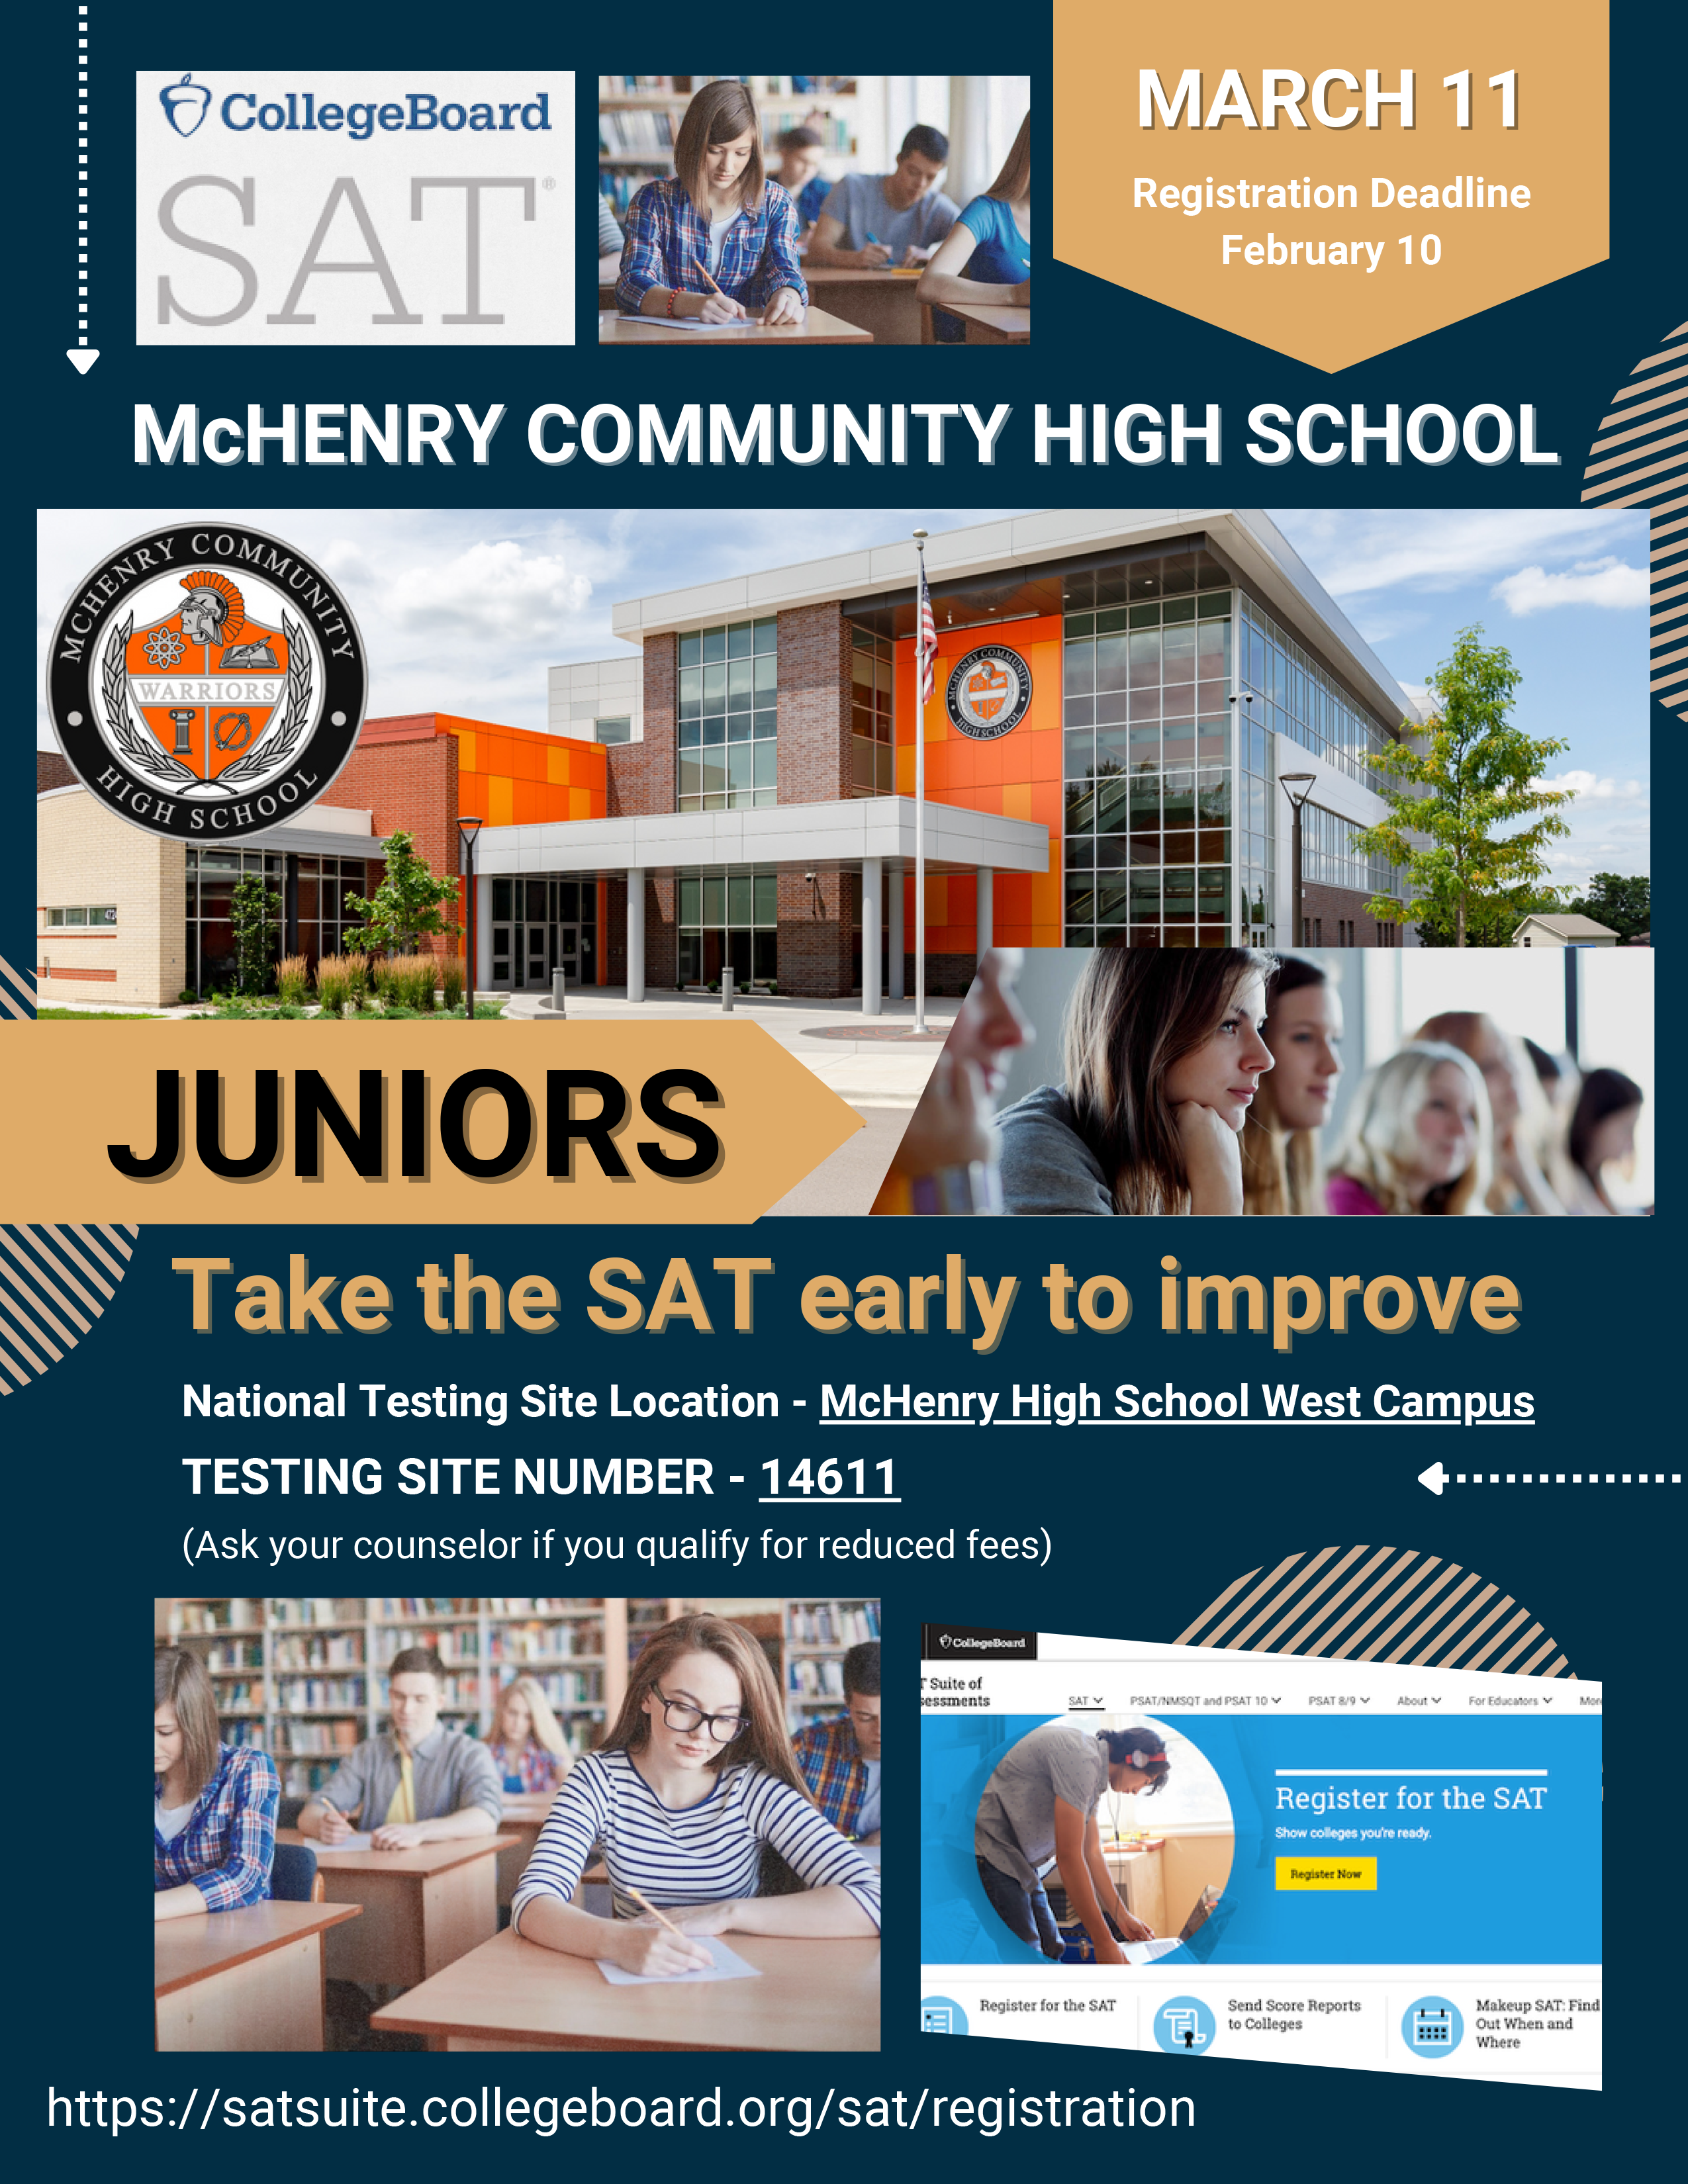 College Board SAT March 11 Registration Deadline February 10 McHenry Community High School. Juniors Take the SAT early to improve. National testing site location McHenry High School West Campus. Testing Site number 14611 (Ask your counselor if you qualify for reduced fees) satsuite.collegeboard.org/sat/registration